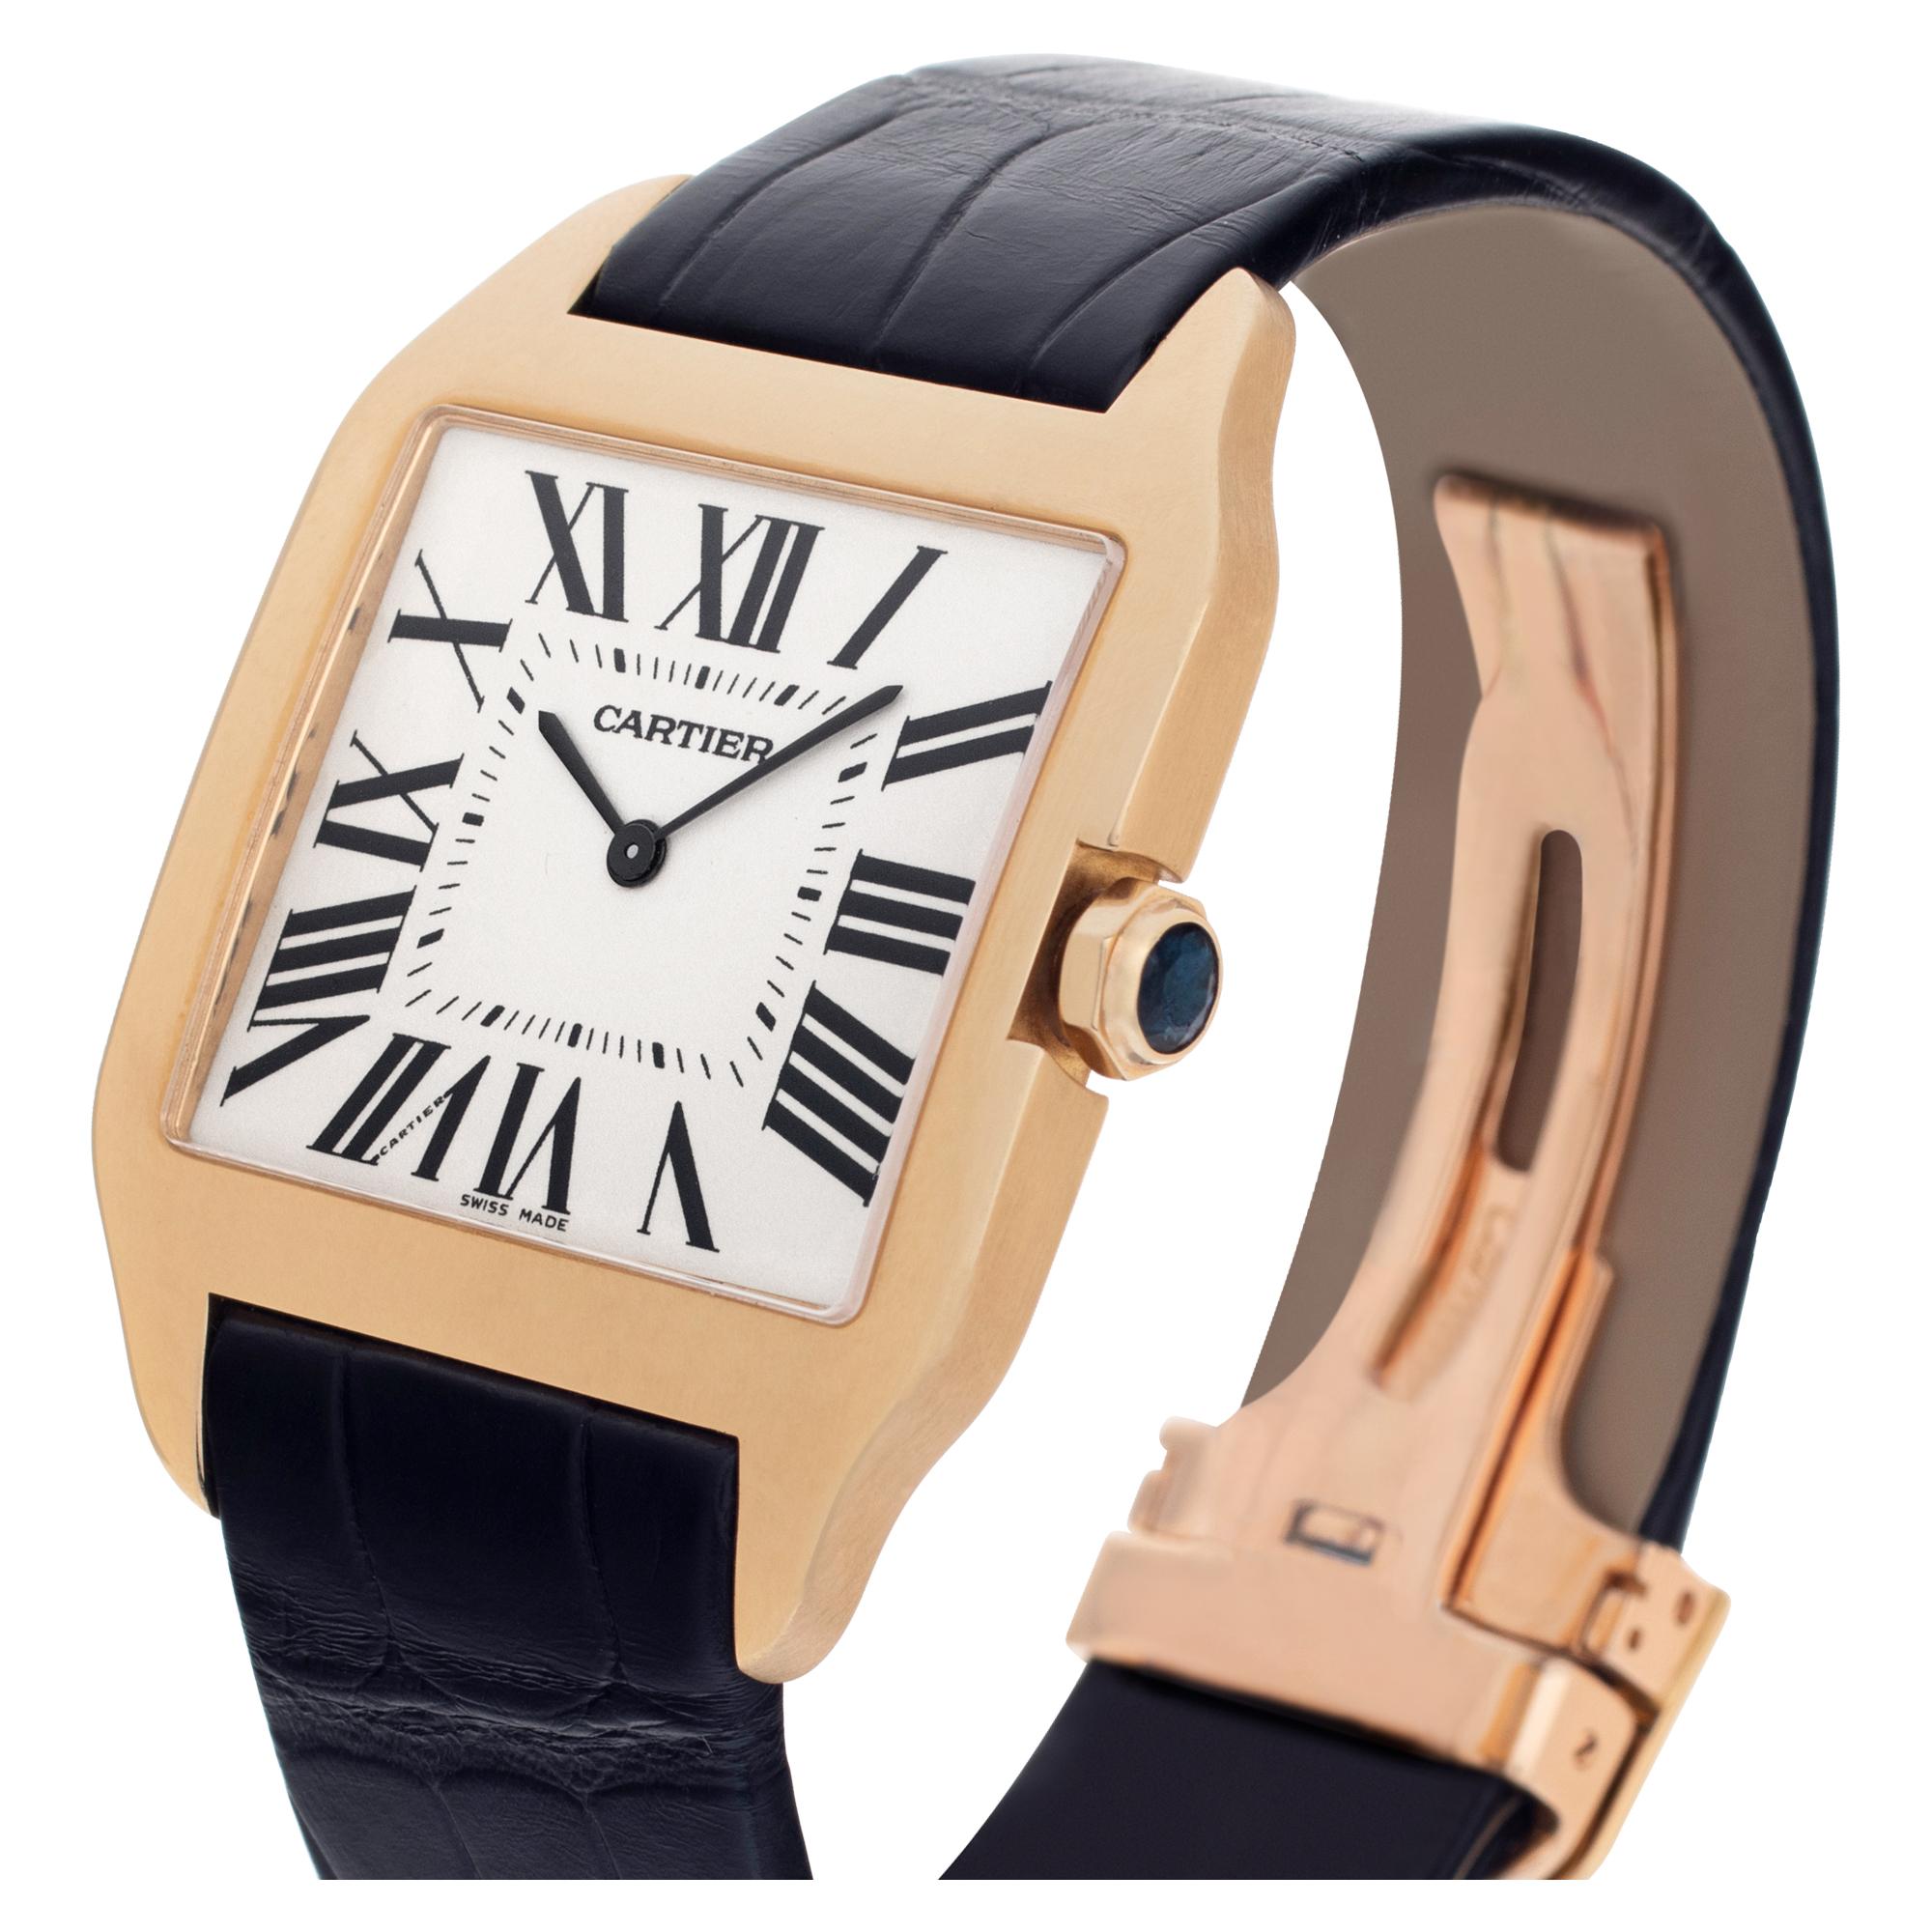 artier Santos Dumont in 18k on leather strap. Manual wind. 35 mm case size. Ref W2008751. Fine Pre-owned Cartier Watch.

Certified preowned Dress Cartier Santos Dumont W2008751 watch is made out of yellow gold on a Black Leather strap with a 18k